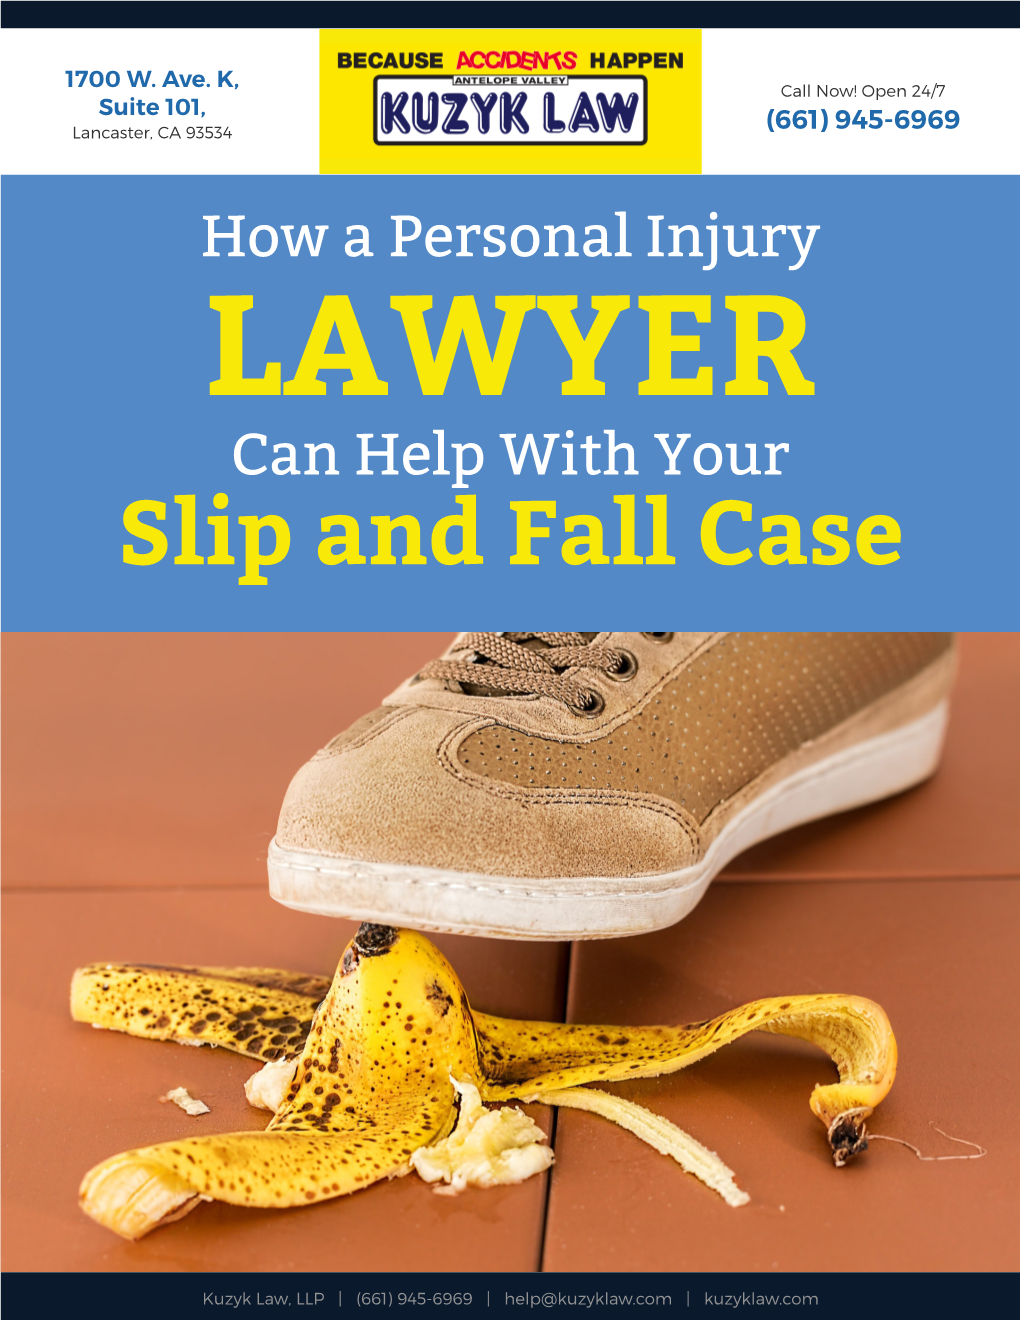 Slip and Fall Case